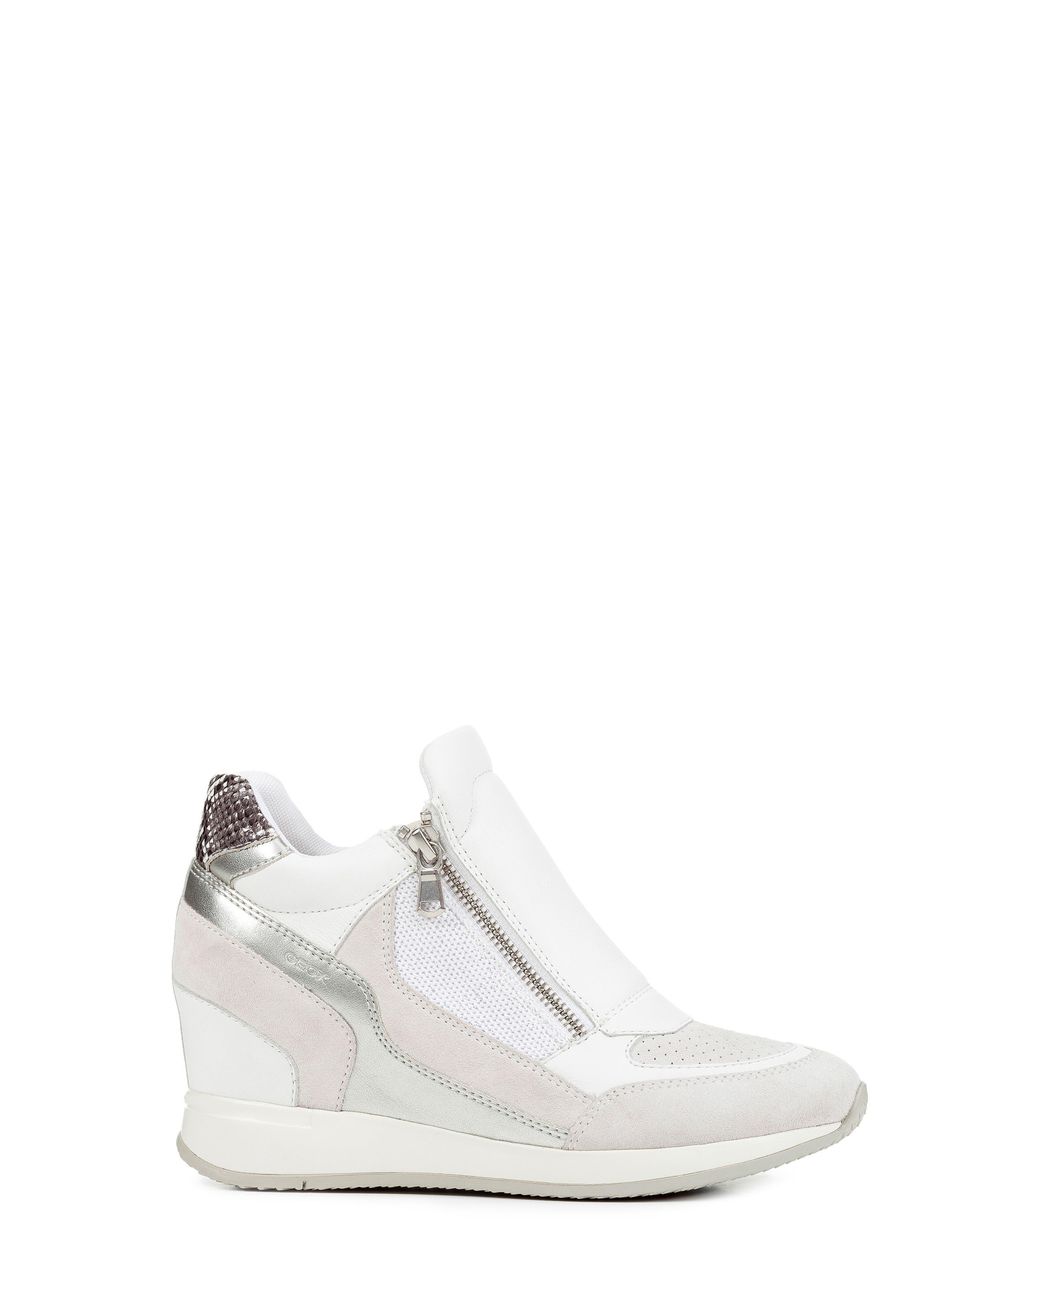 Geox Nydame Wedge Sneaker in White | Lyst